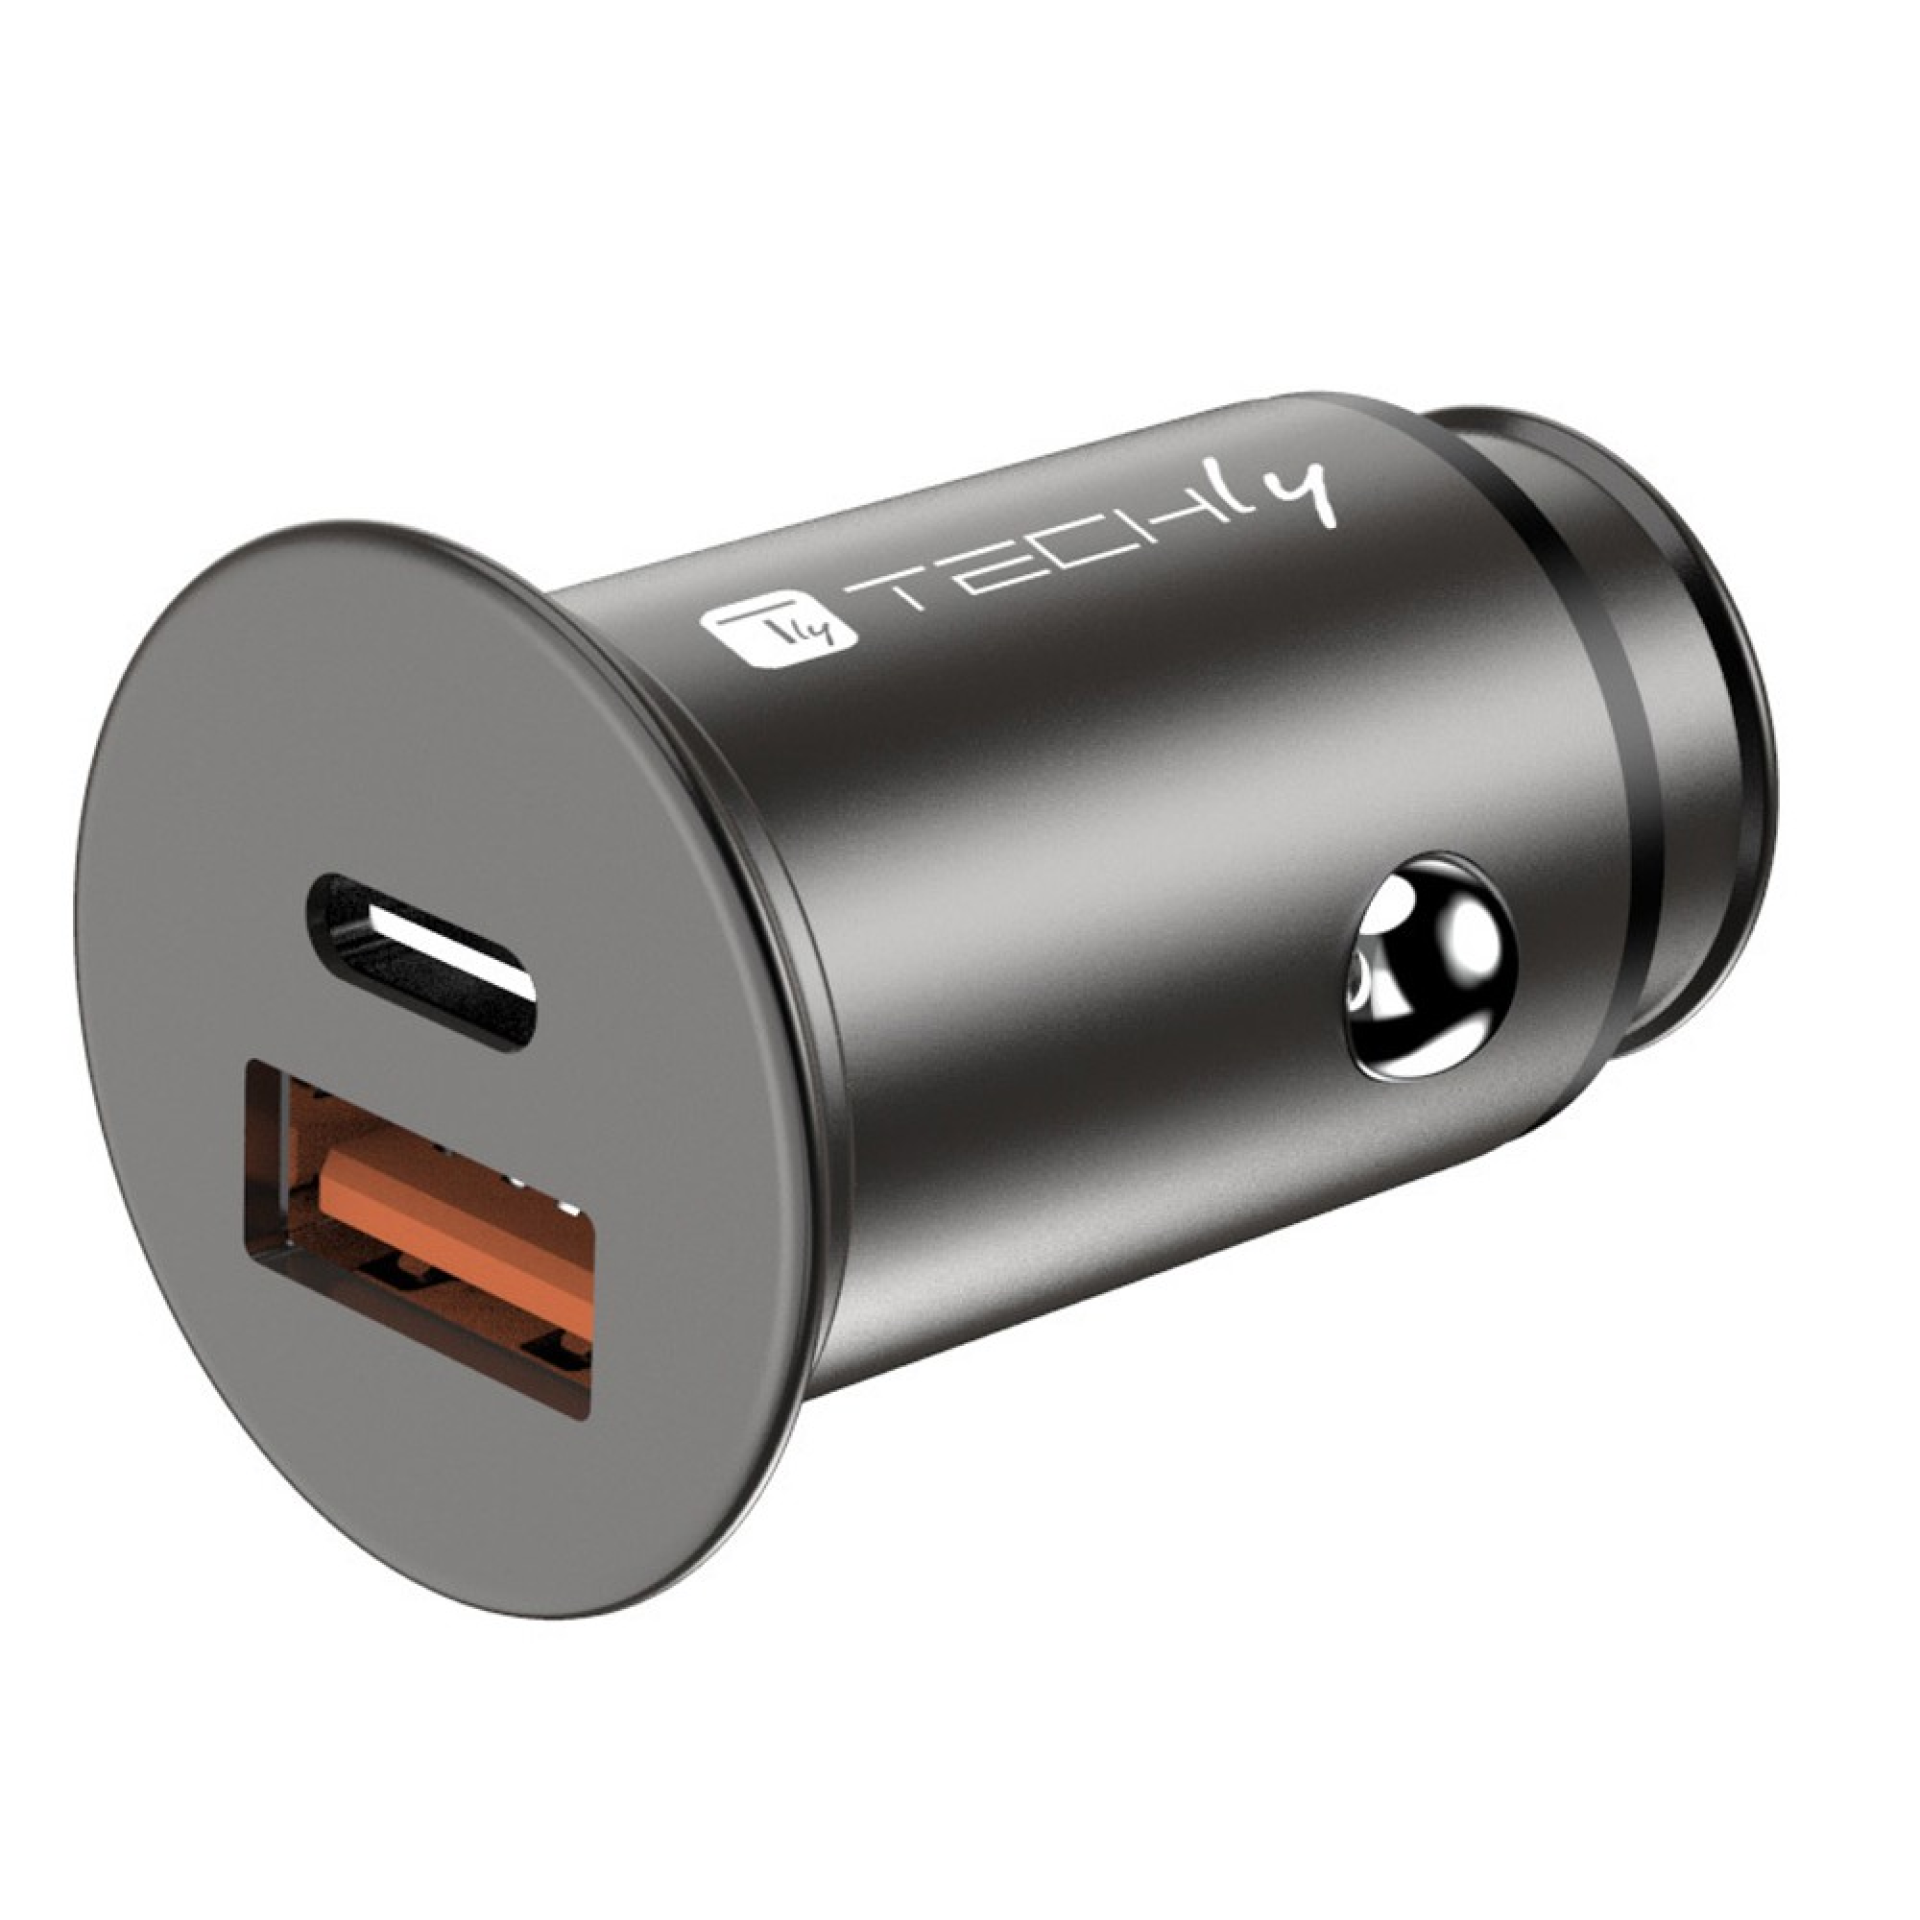 Techly car charger USB-A and USB-C Fast Charger 3.0 38W metal housing